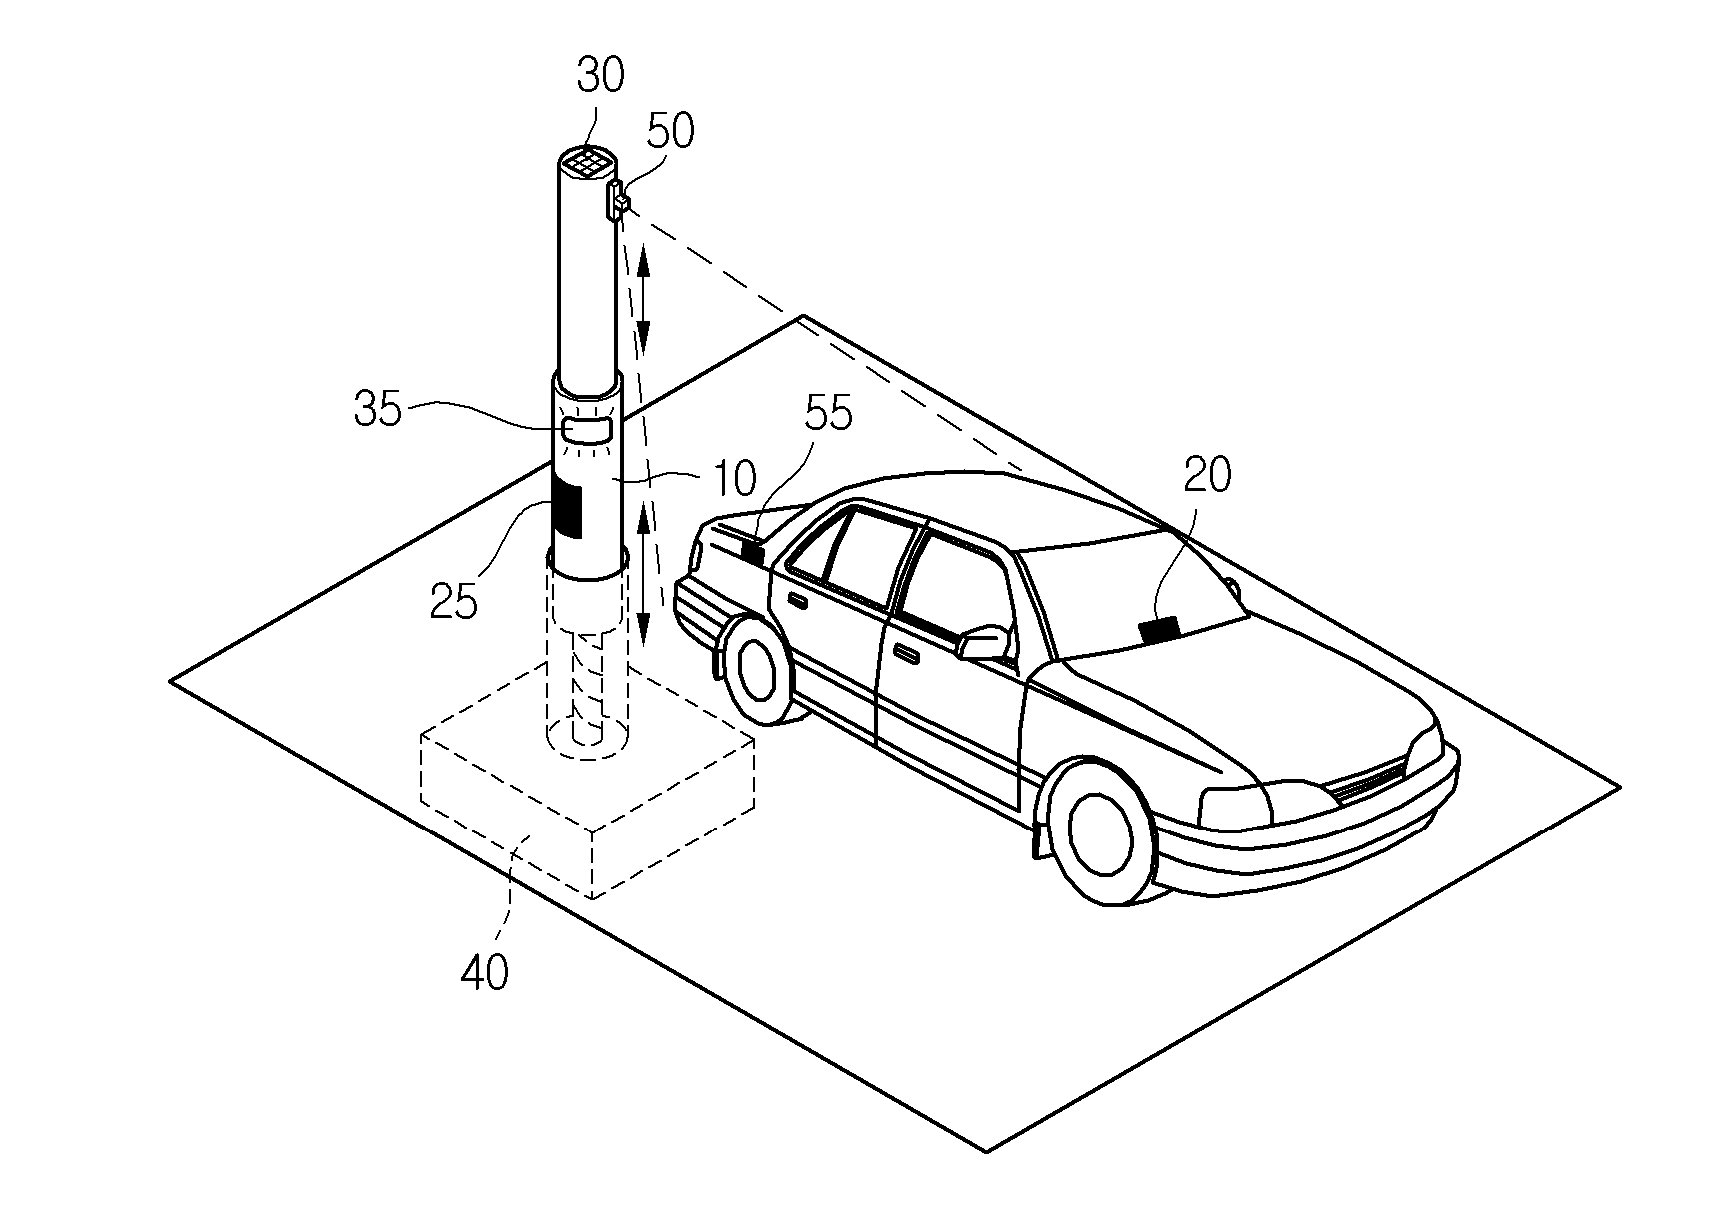 Parking barricate device with sensing vehicle